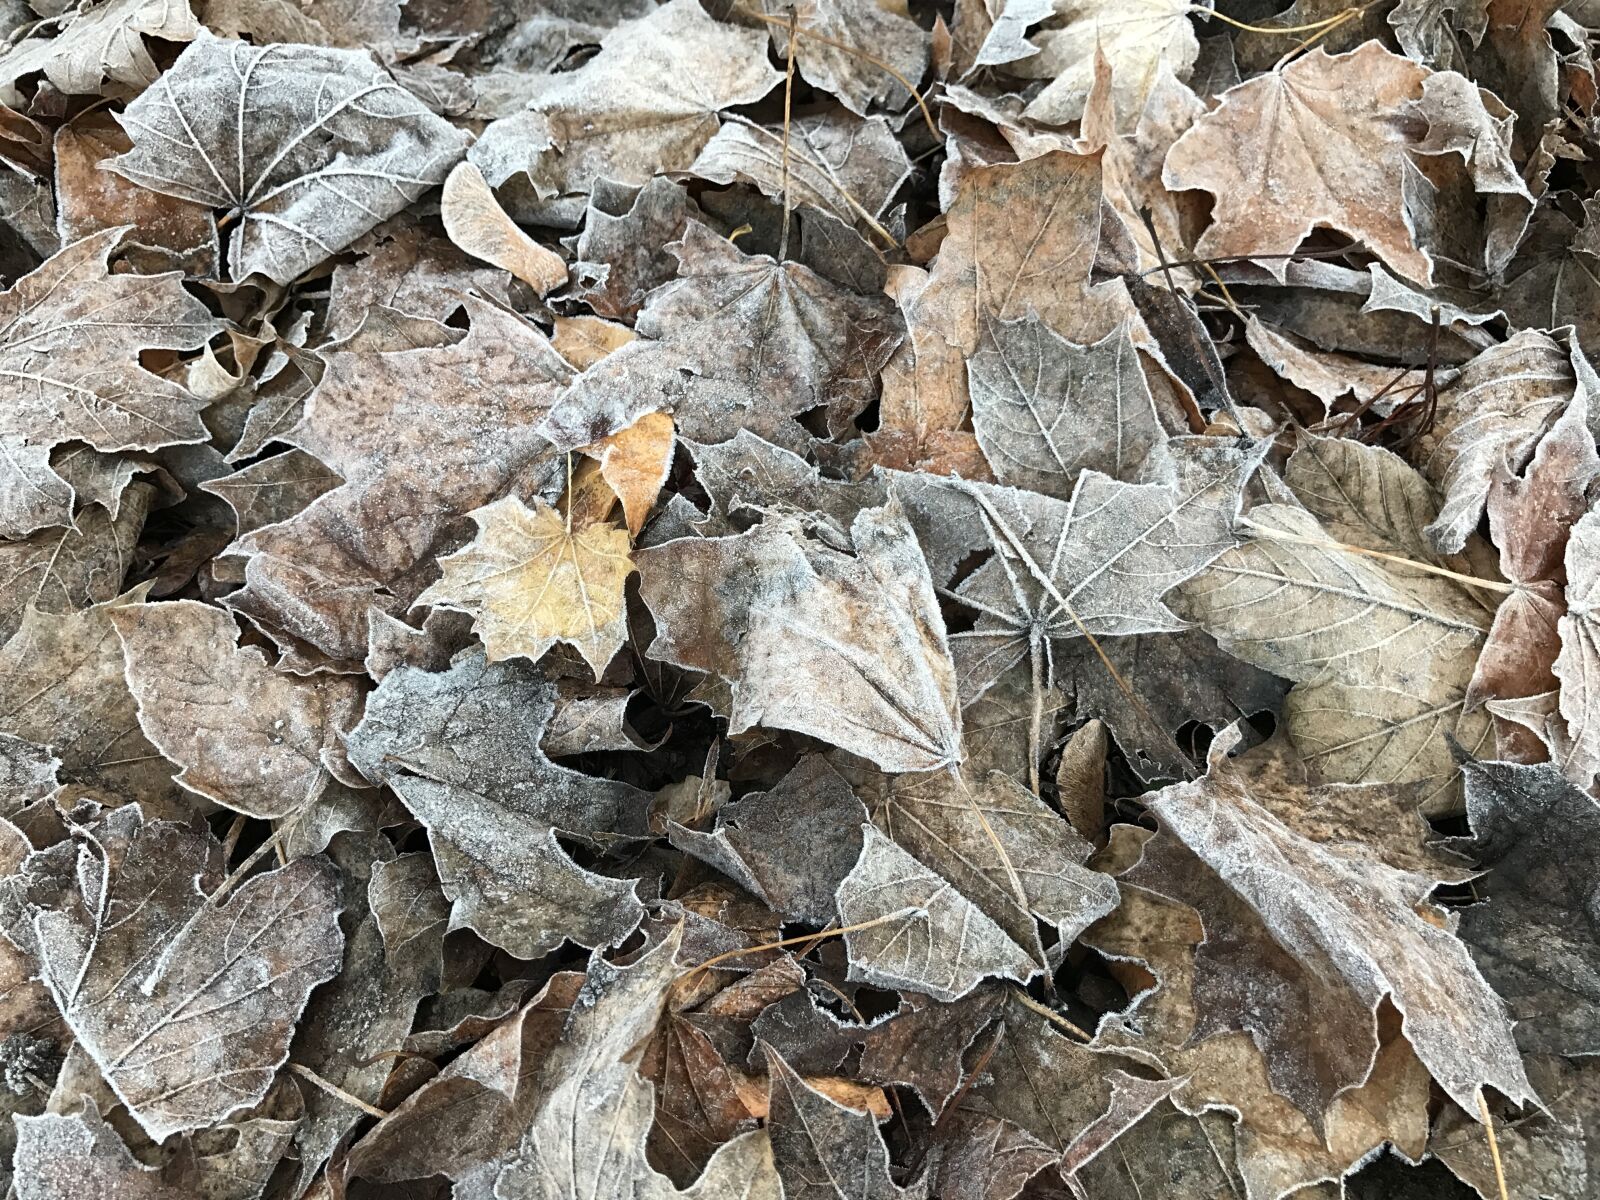 iPhone 7 Plus back iSight Duo camera 3.99mm f/1.8 sample photo. Leaves, winter, frost photography